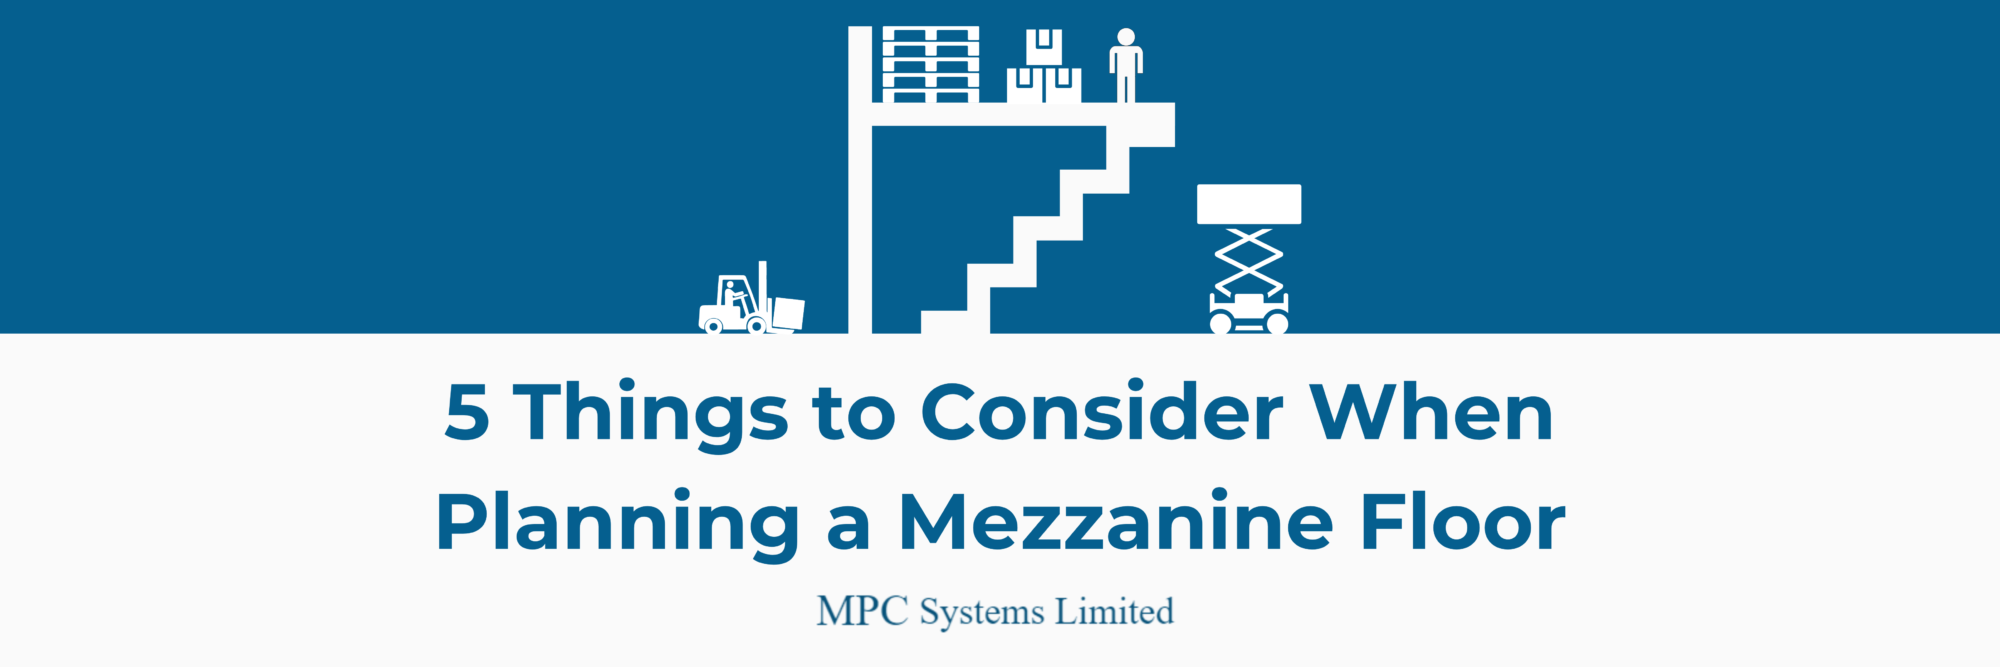 5 Things to Consider When Planning a Mezzanine Floor